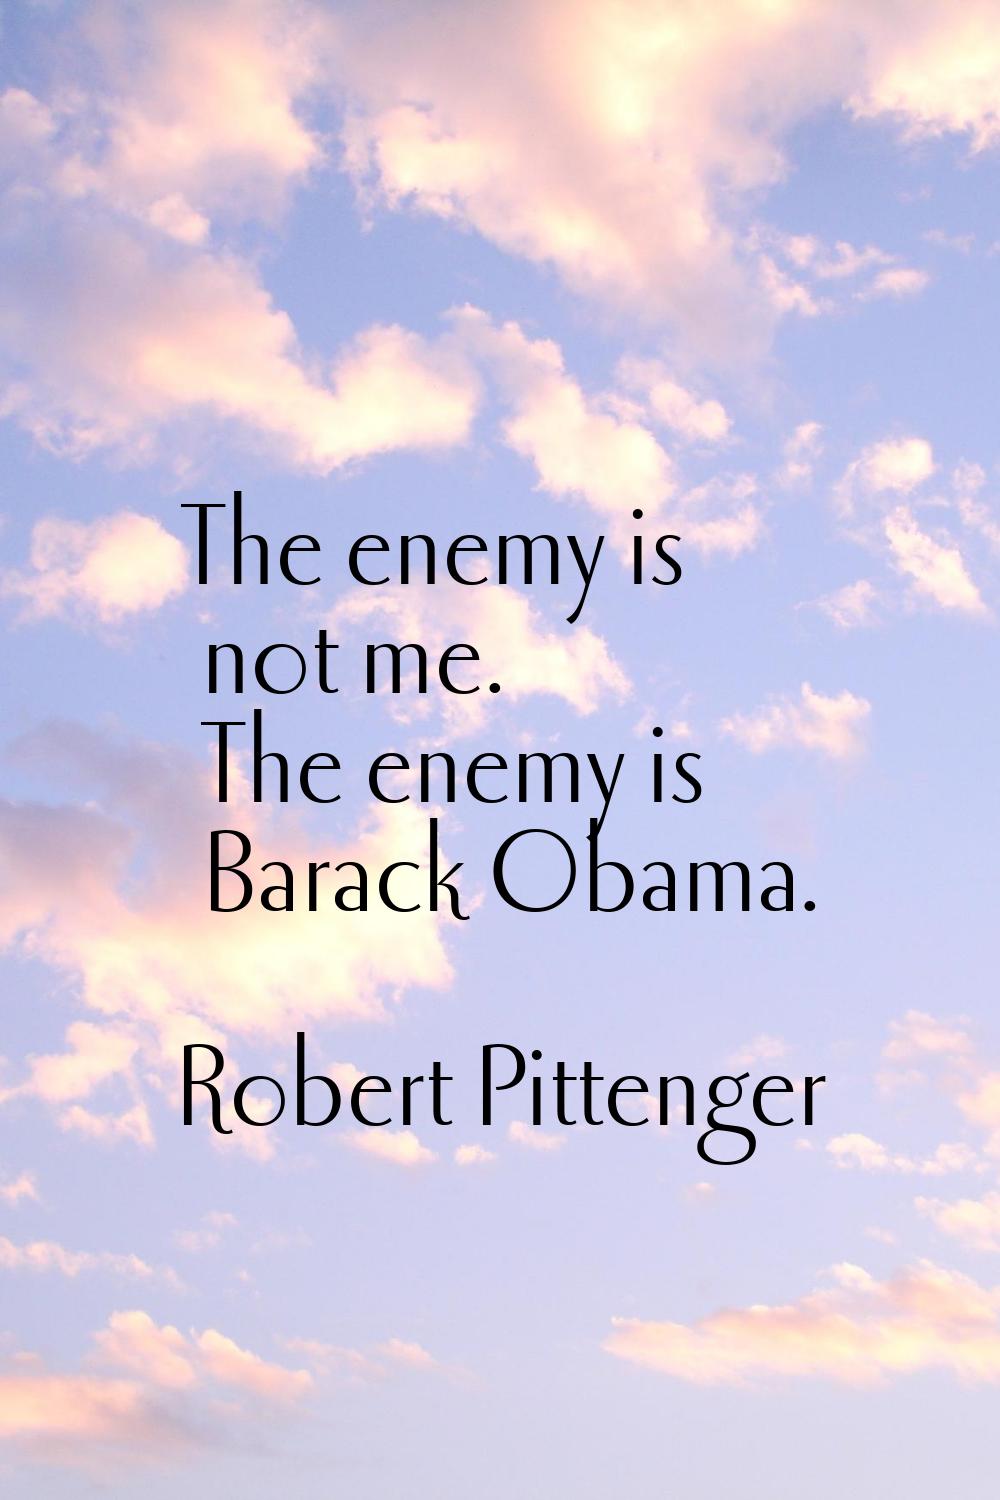 The enemy is not me. The enemy is Barack Obama.